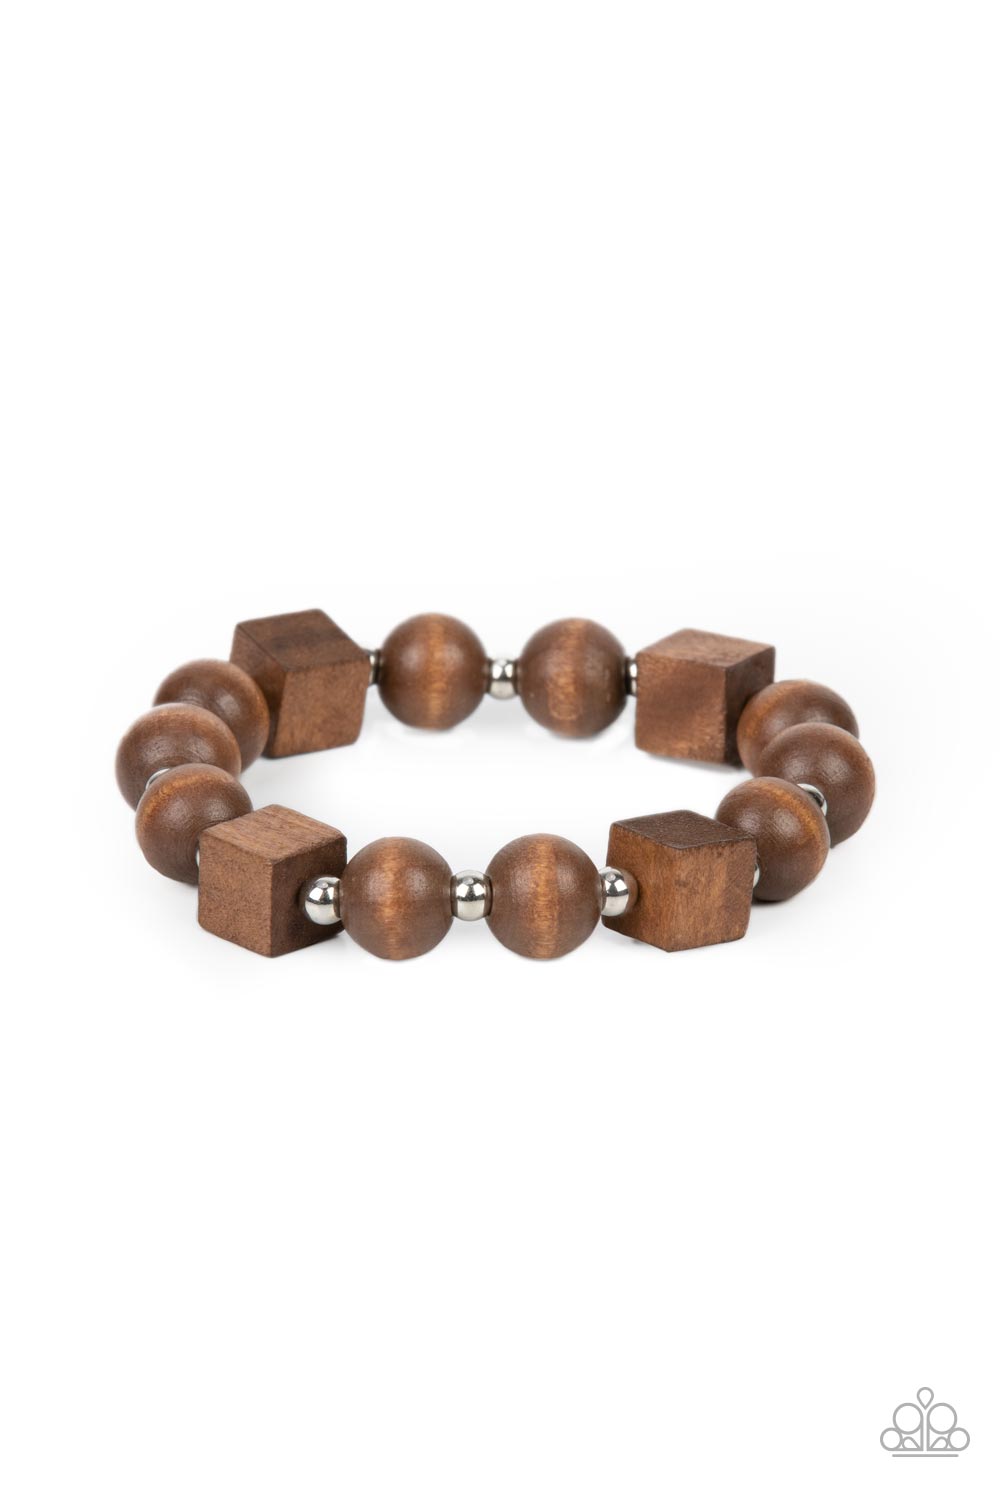 Timber Trendsetter - Earthy Brown Wood - Silver Stretchy Bracelet - Paparazzi Accessories - An earthy collection of round and cube wooden beads are threaded along a stretchy band around the wrist for a natural look. 